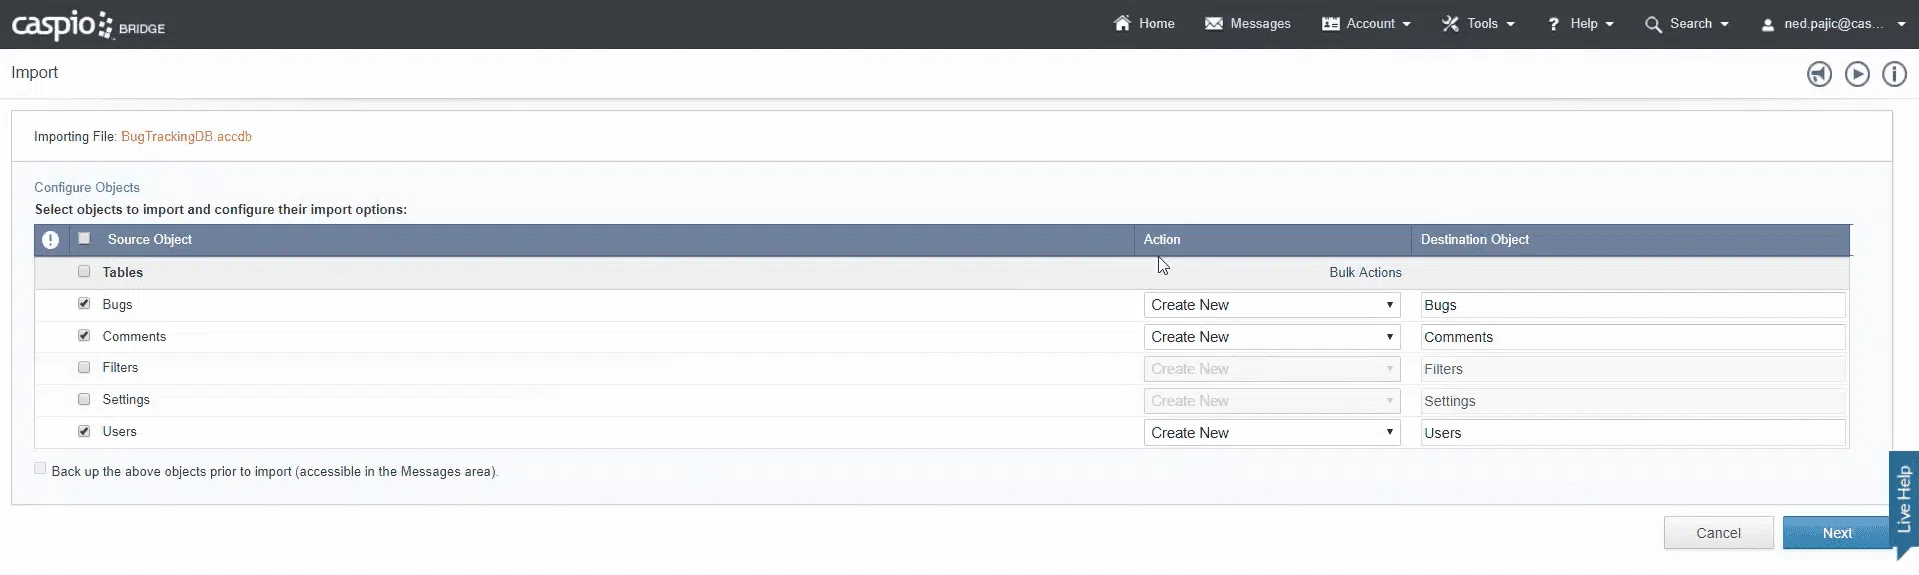 Screenshot of the “Import” tool on the Caspio app builder. It shows the “Configure Objects” step.